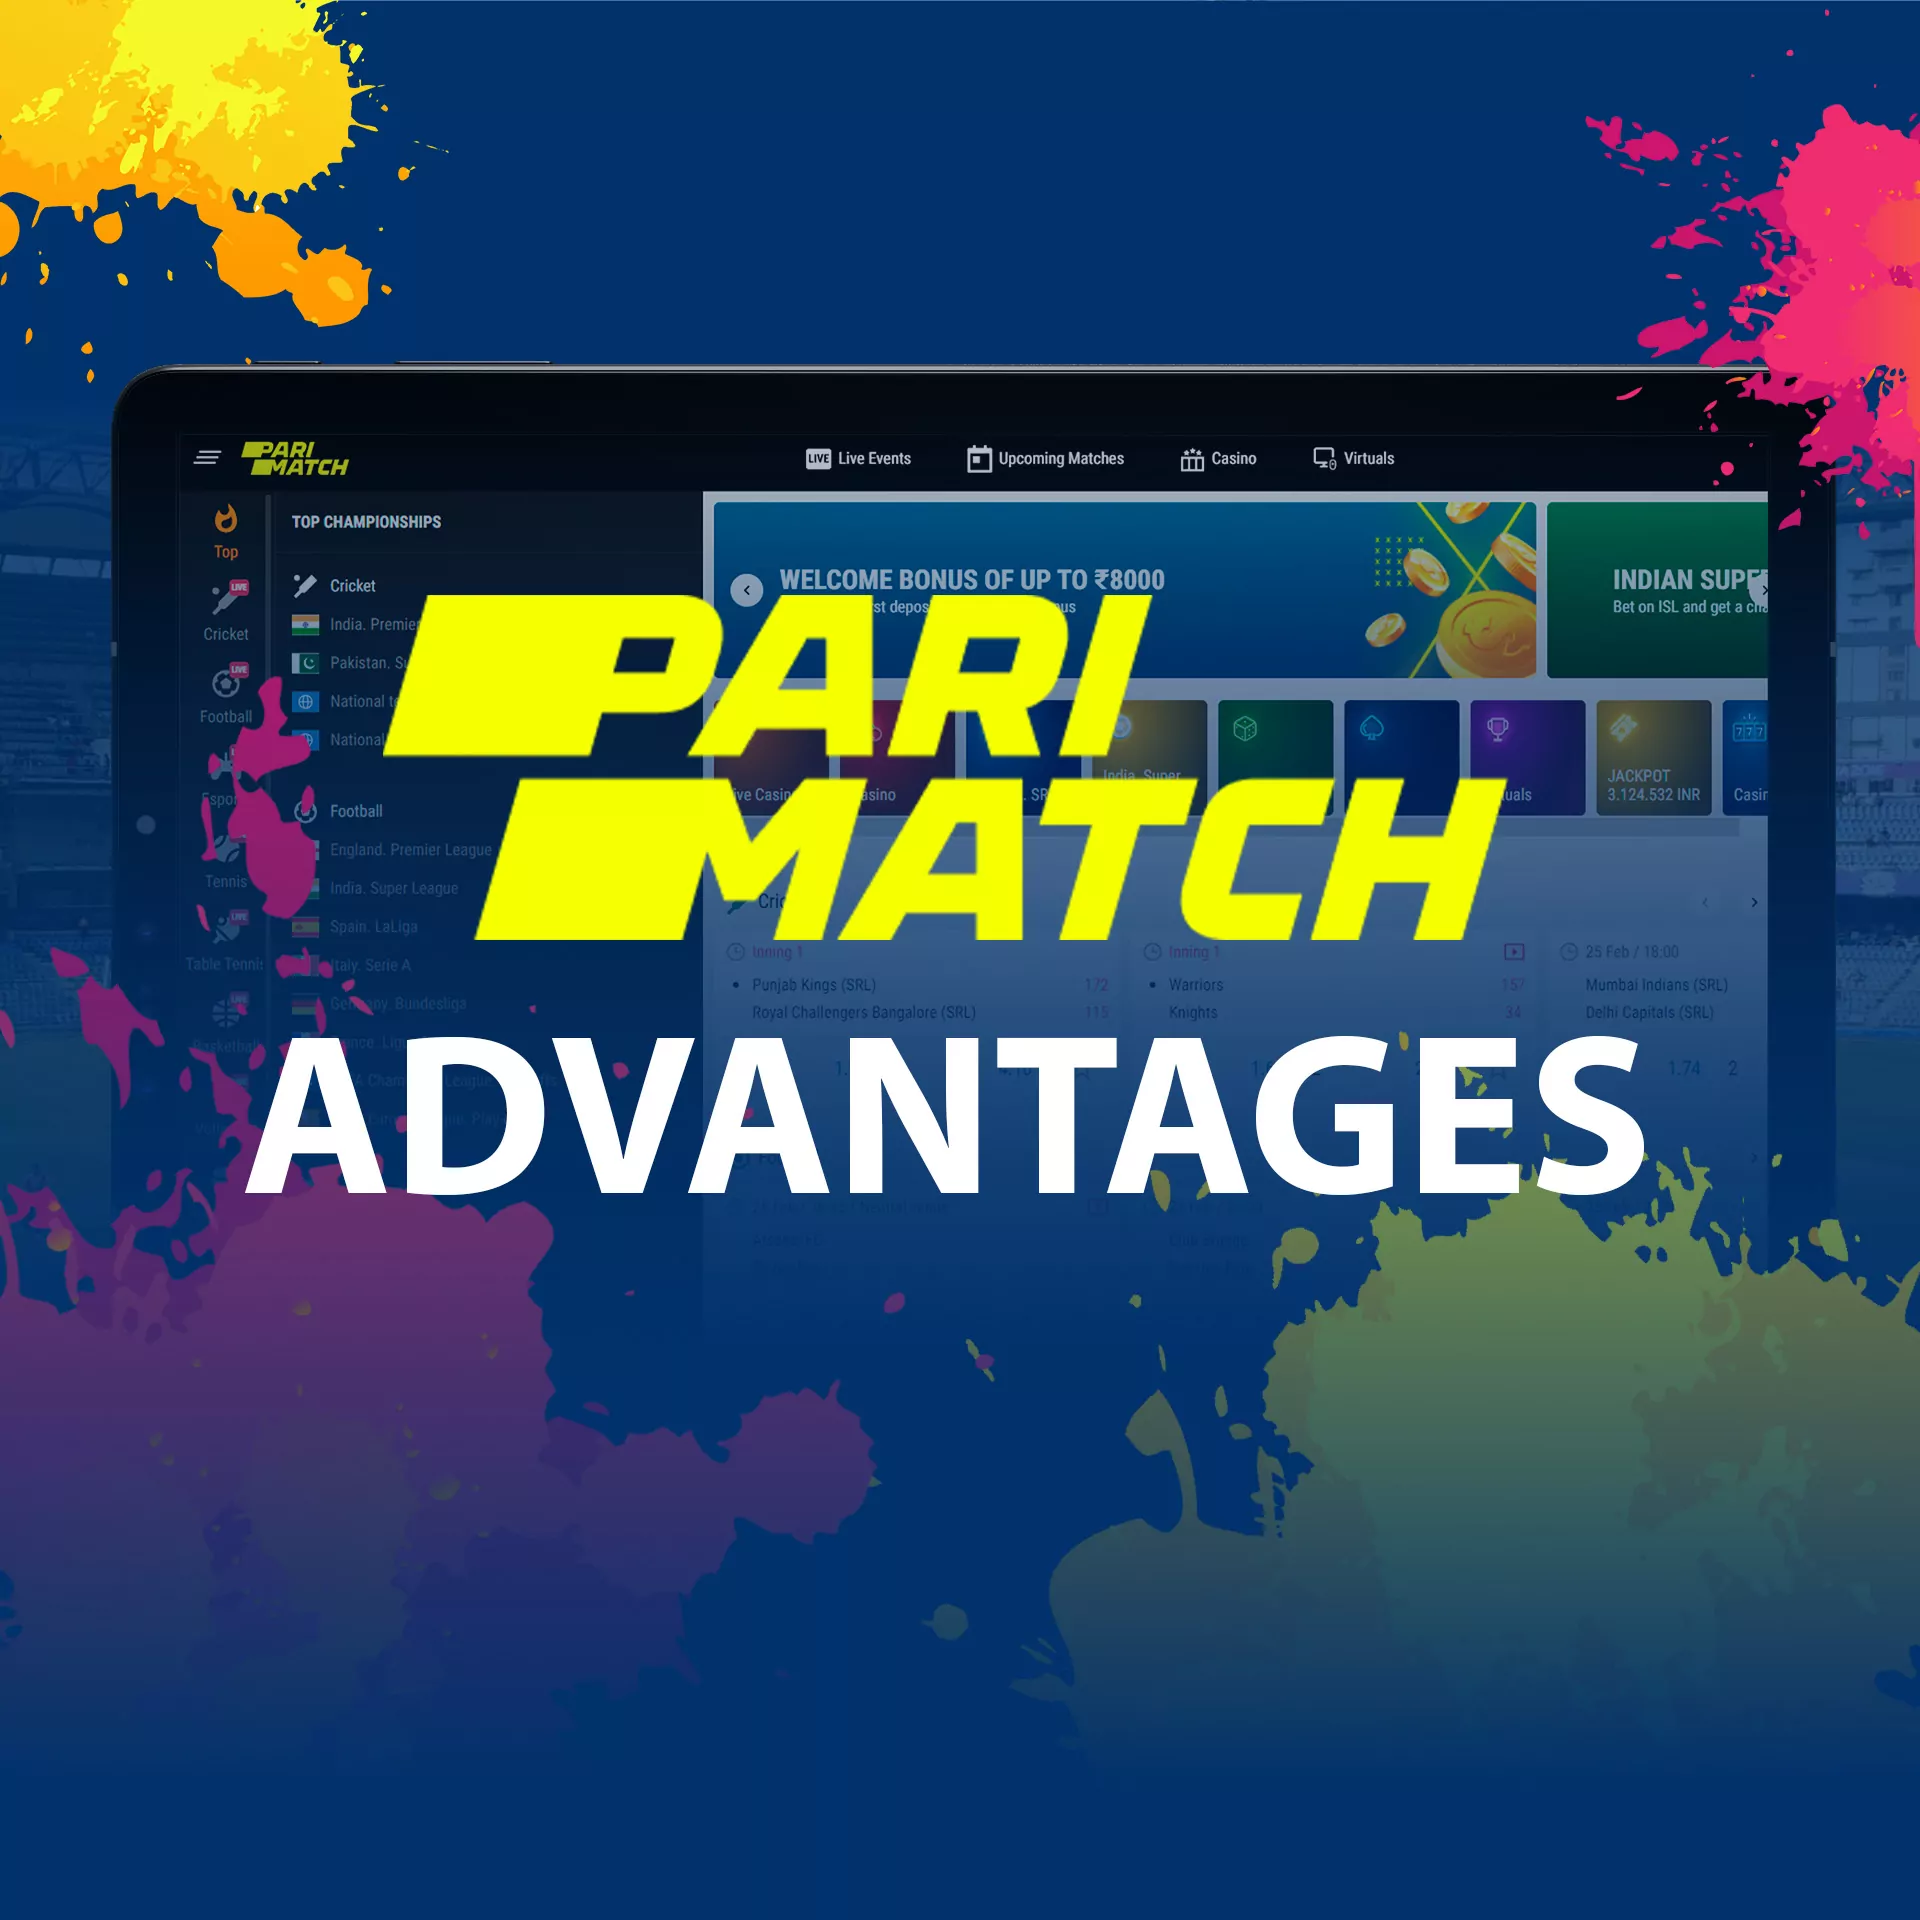 Parimatch have a lot of advantages like high odds, up to 12000 INR welcome bonus, wide range of cricket betting options.